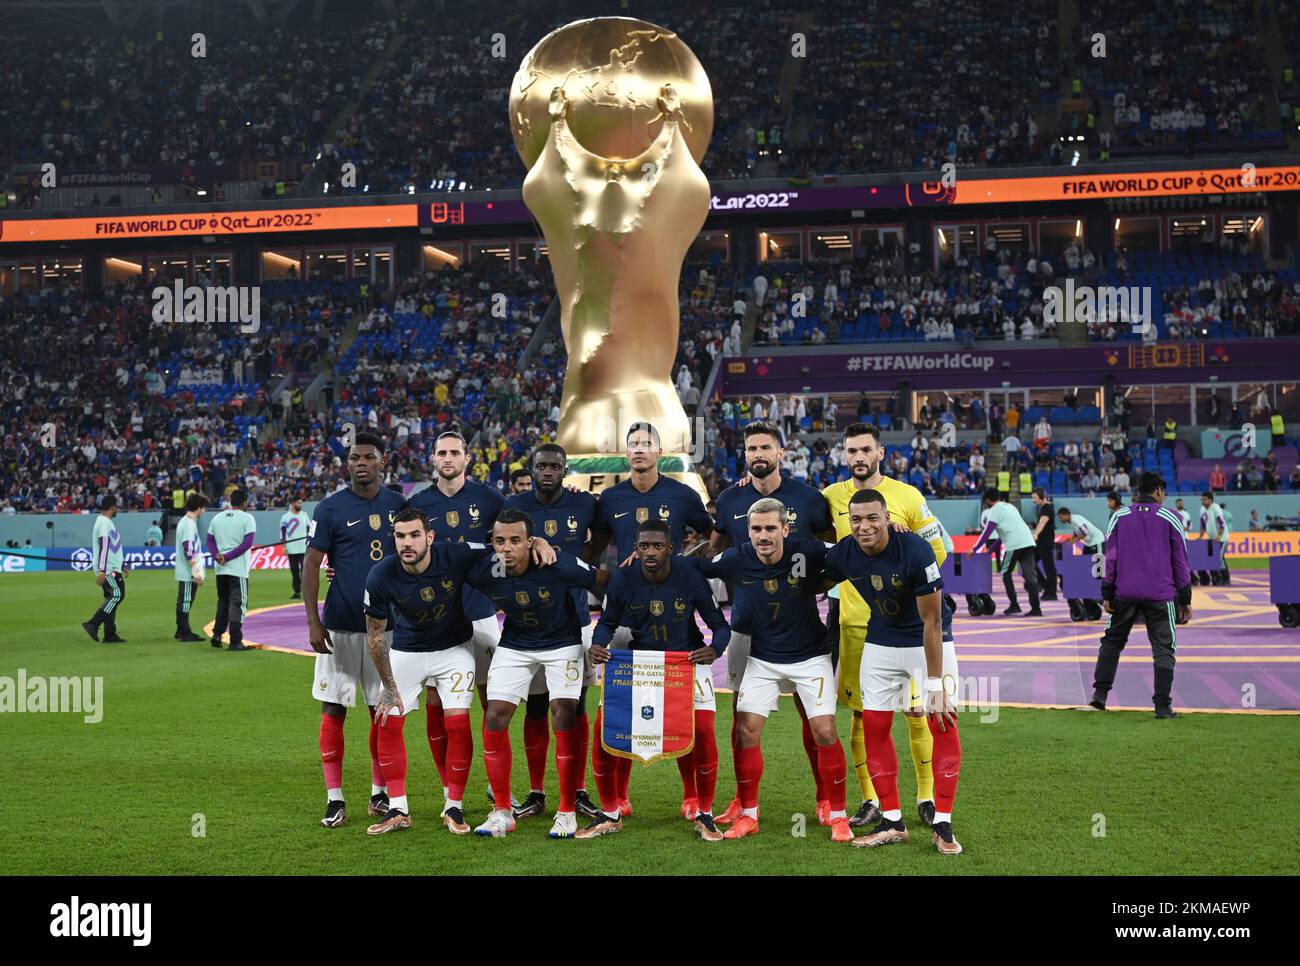 Doha, Qatar. 26th Nov, 2022. Soccer, World Cup, France - Denmark, Preliminary Round, Group D, Matchday 2, Stadium 974, the players of the French starting eleven stand together for a team photo in front of the oversized replica of the World Cup trophy before the start of the match, Aurélien Tchouameni (l-r), Theo Hernandez, Adrien Rabiot, Jules Kounde, Dayot Upamecano, Raphael Varane, Ousmane Dembele, Olivier Giroud, Antoine Griezmann, goalkeeper Hugo Lloris and Kylian Mbappe. Credit: Robert Michael/dpa/Alamy Live News Stock Photo